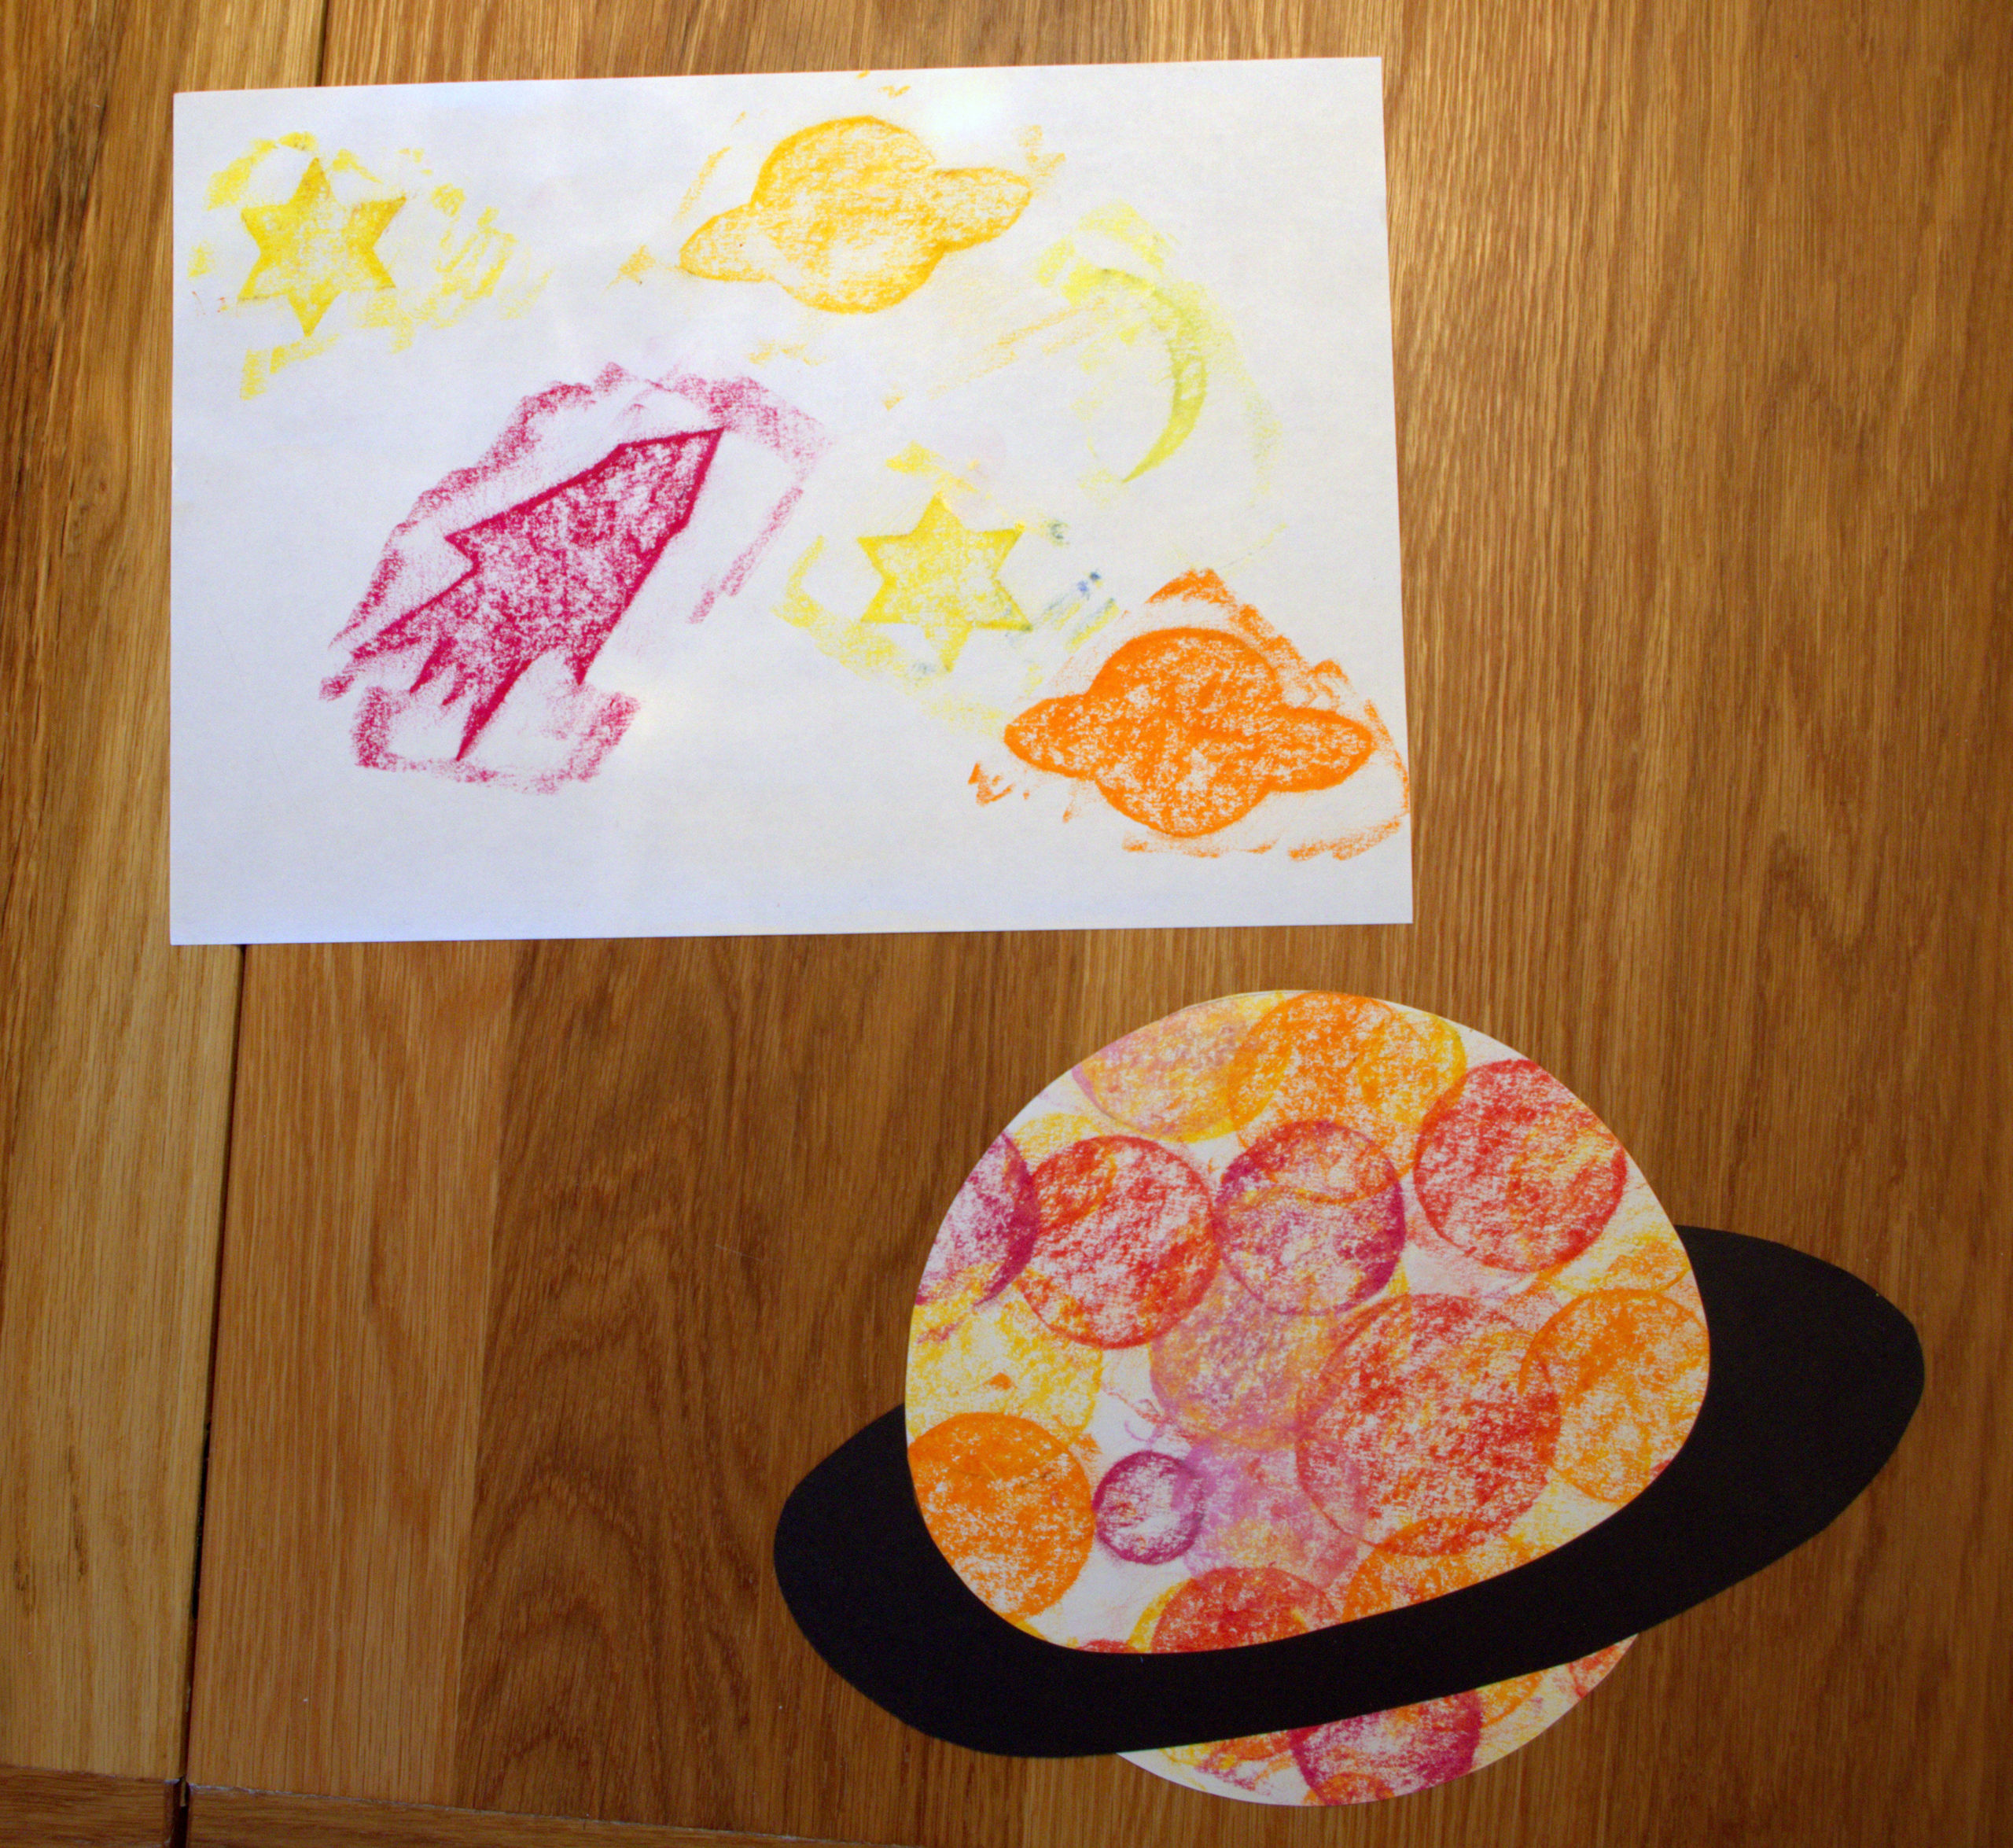 Space Rubbings - Space-themed pictures made by rubbing crayons over cardboard cut-out shapes.